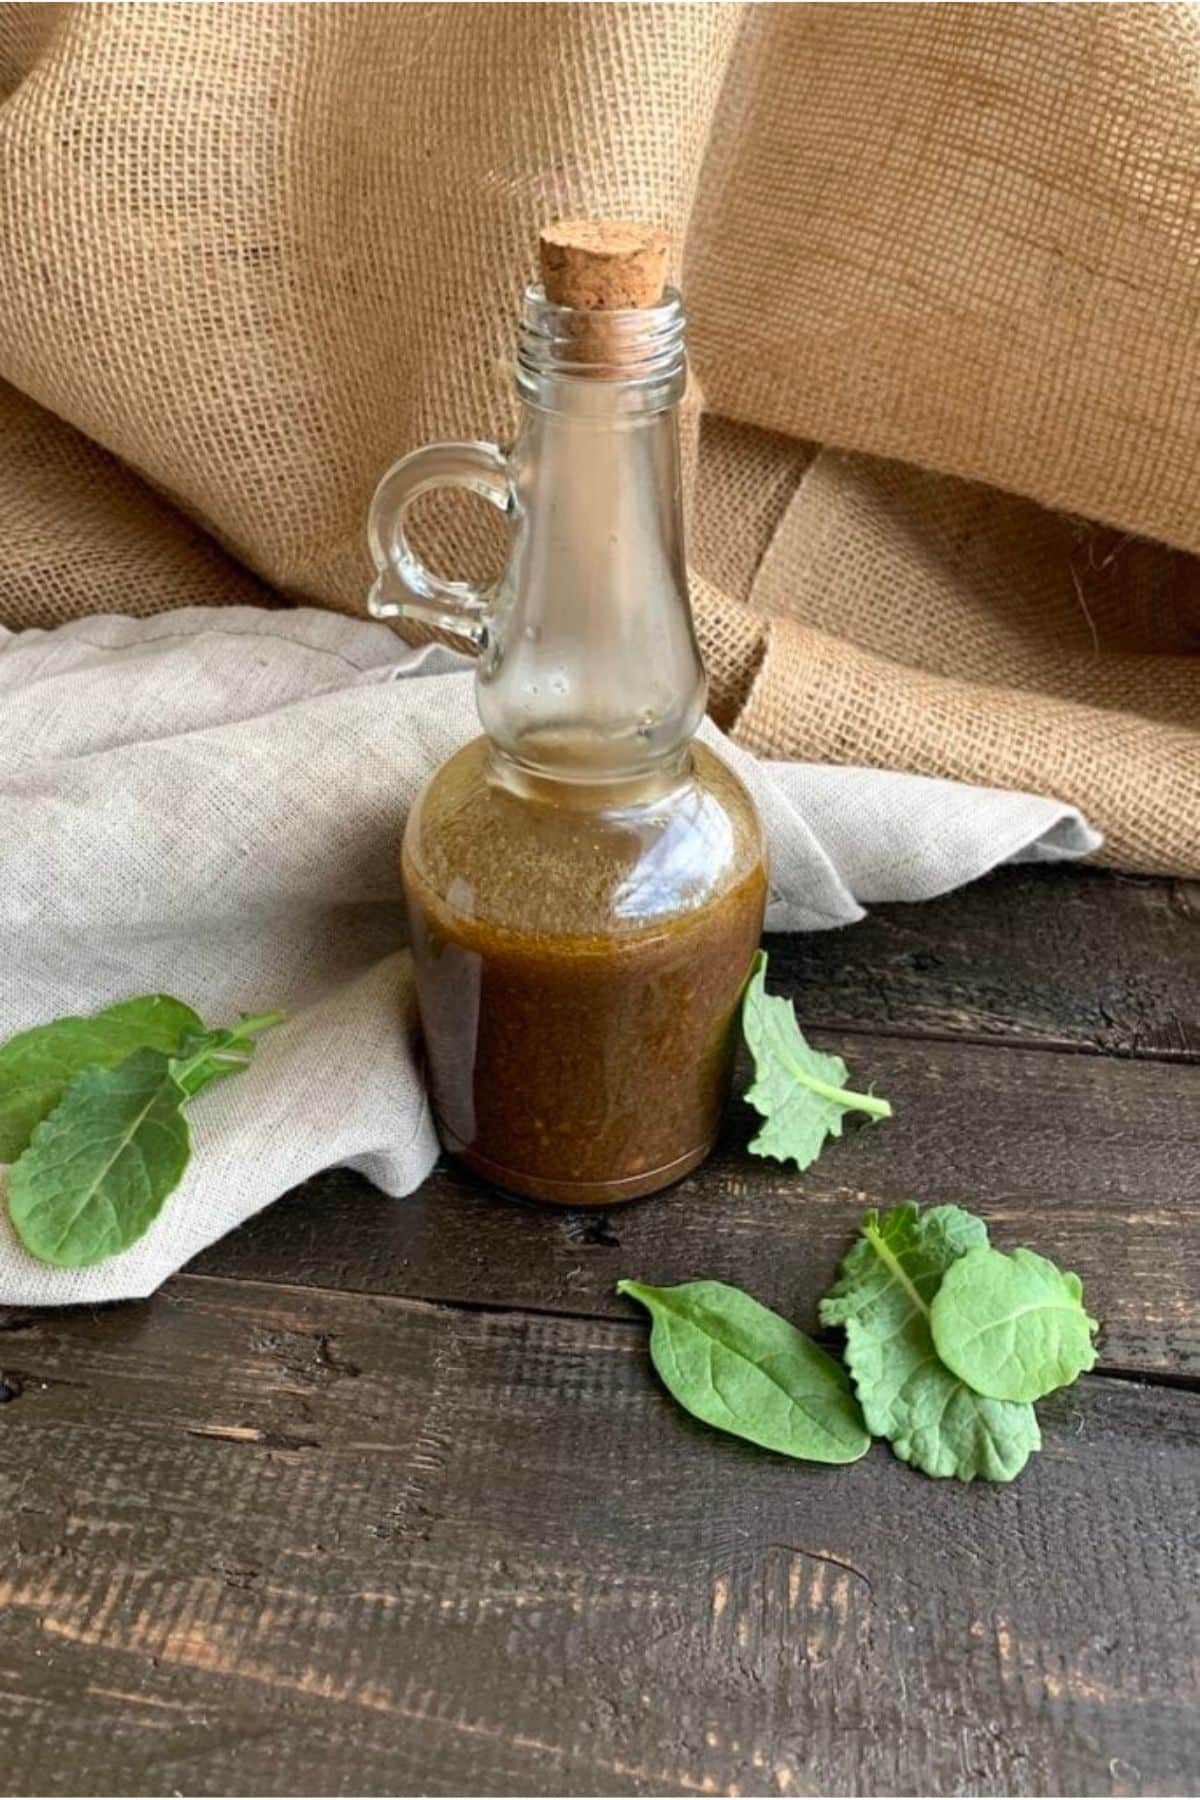 Bottle of salad dressing on black wooden table with basil and napkin.